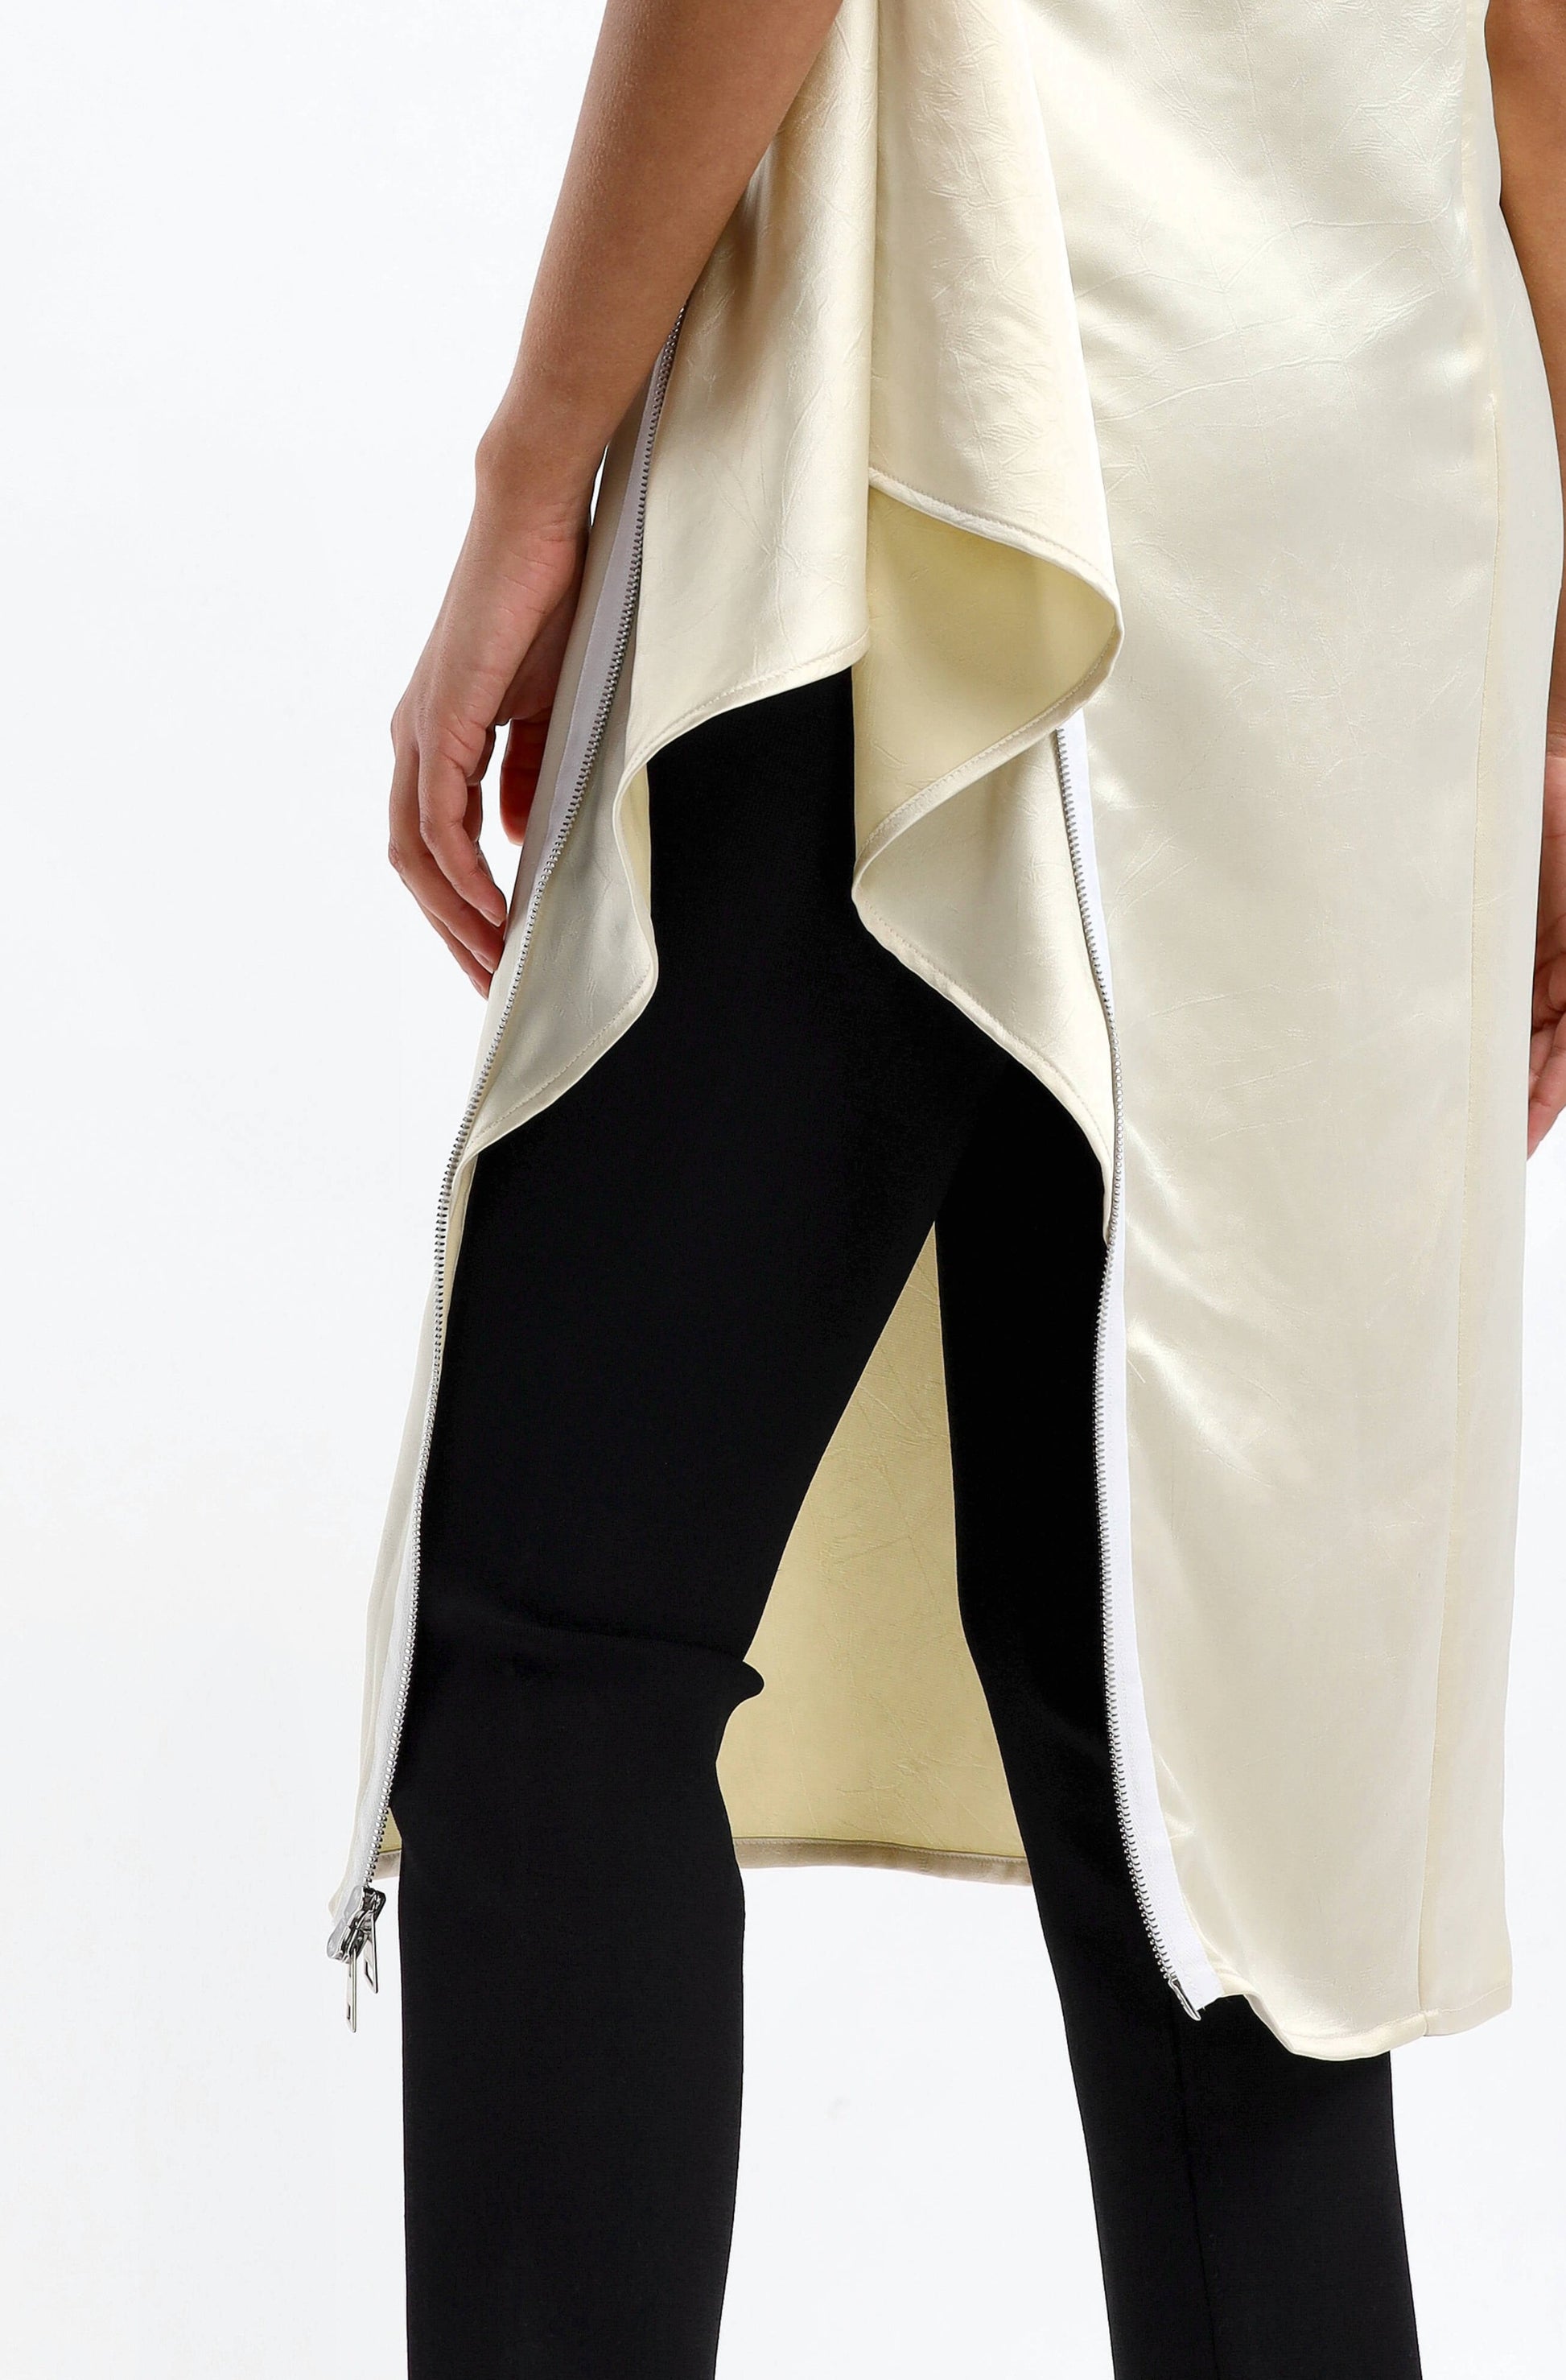 Top Zip Detail in Off WhiteJW Anderson - Anita Hass